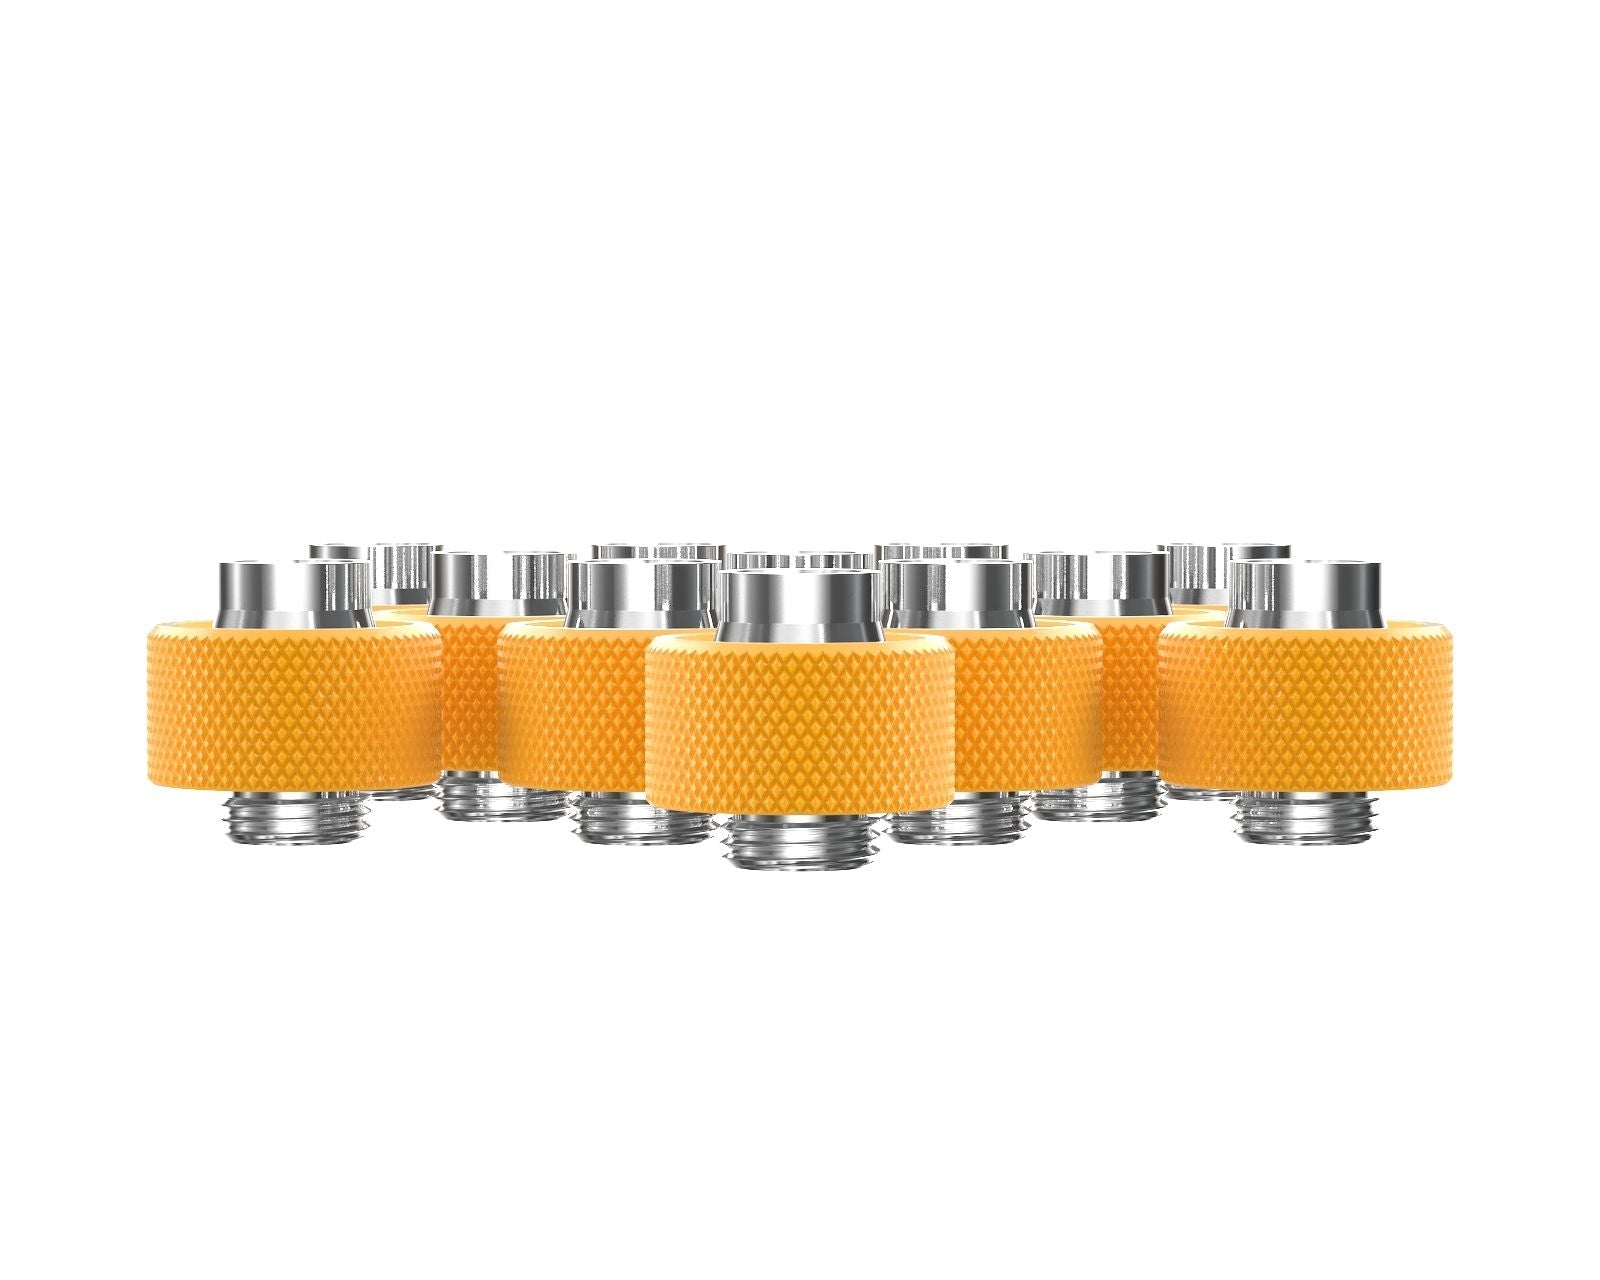 PrimoChill SecureFit SX - Premium Compression Fittings 12 Pack - For 1/2in ID x 3/4in OD Flexible Tubing (F-SFSX34-12) - Available in 20+ Colors, Custom Watercooling Loop Ready - Yellow